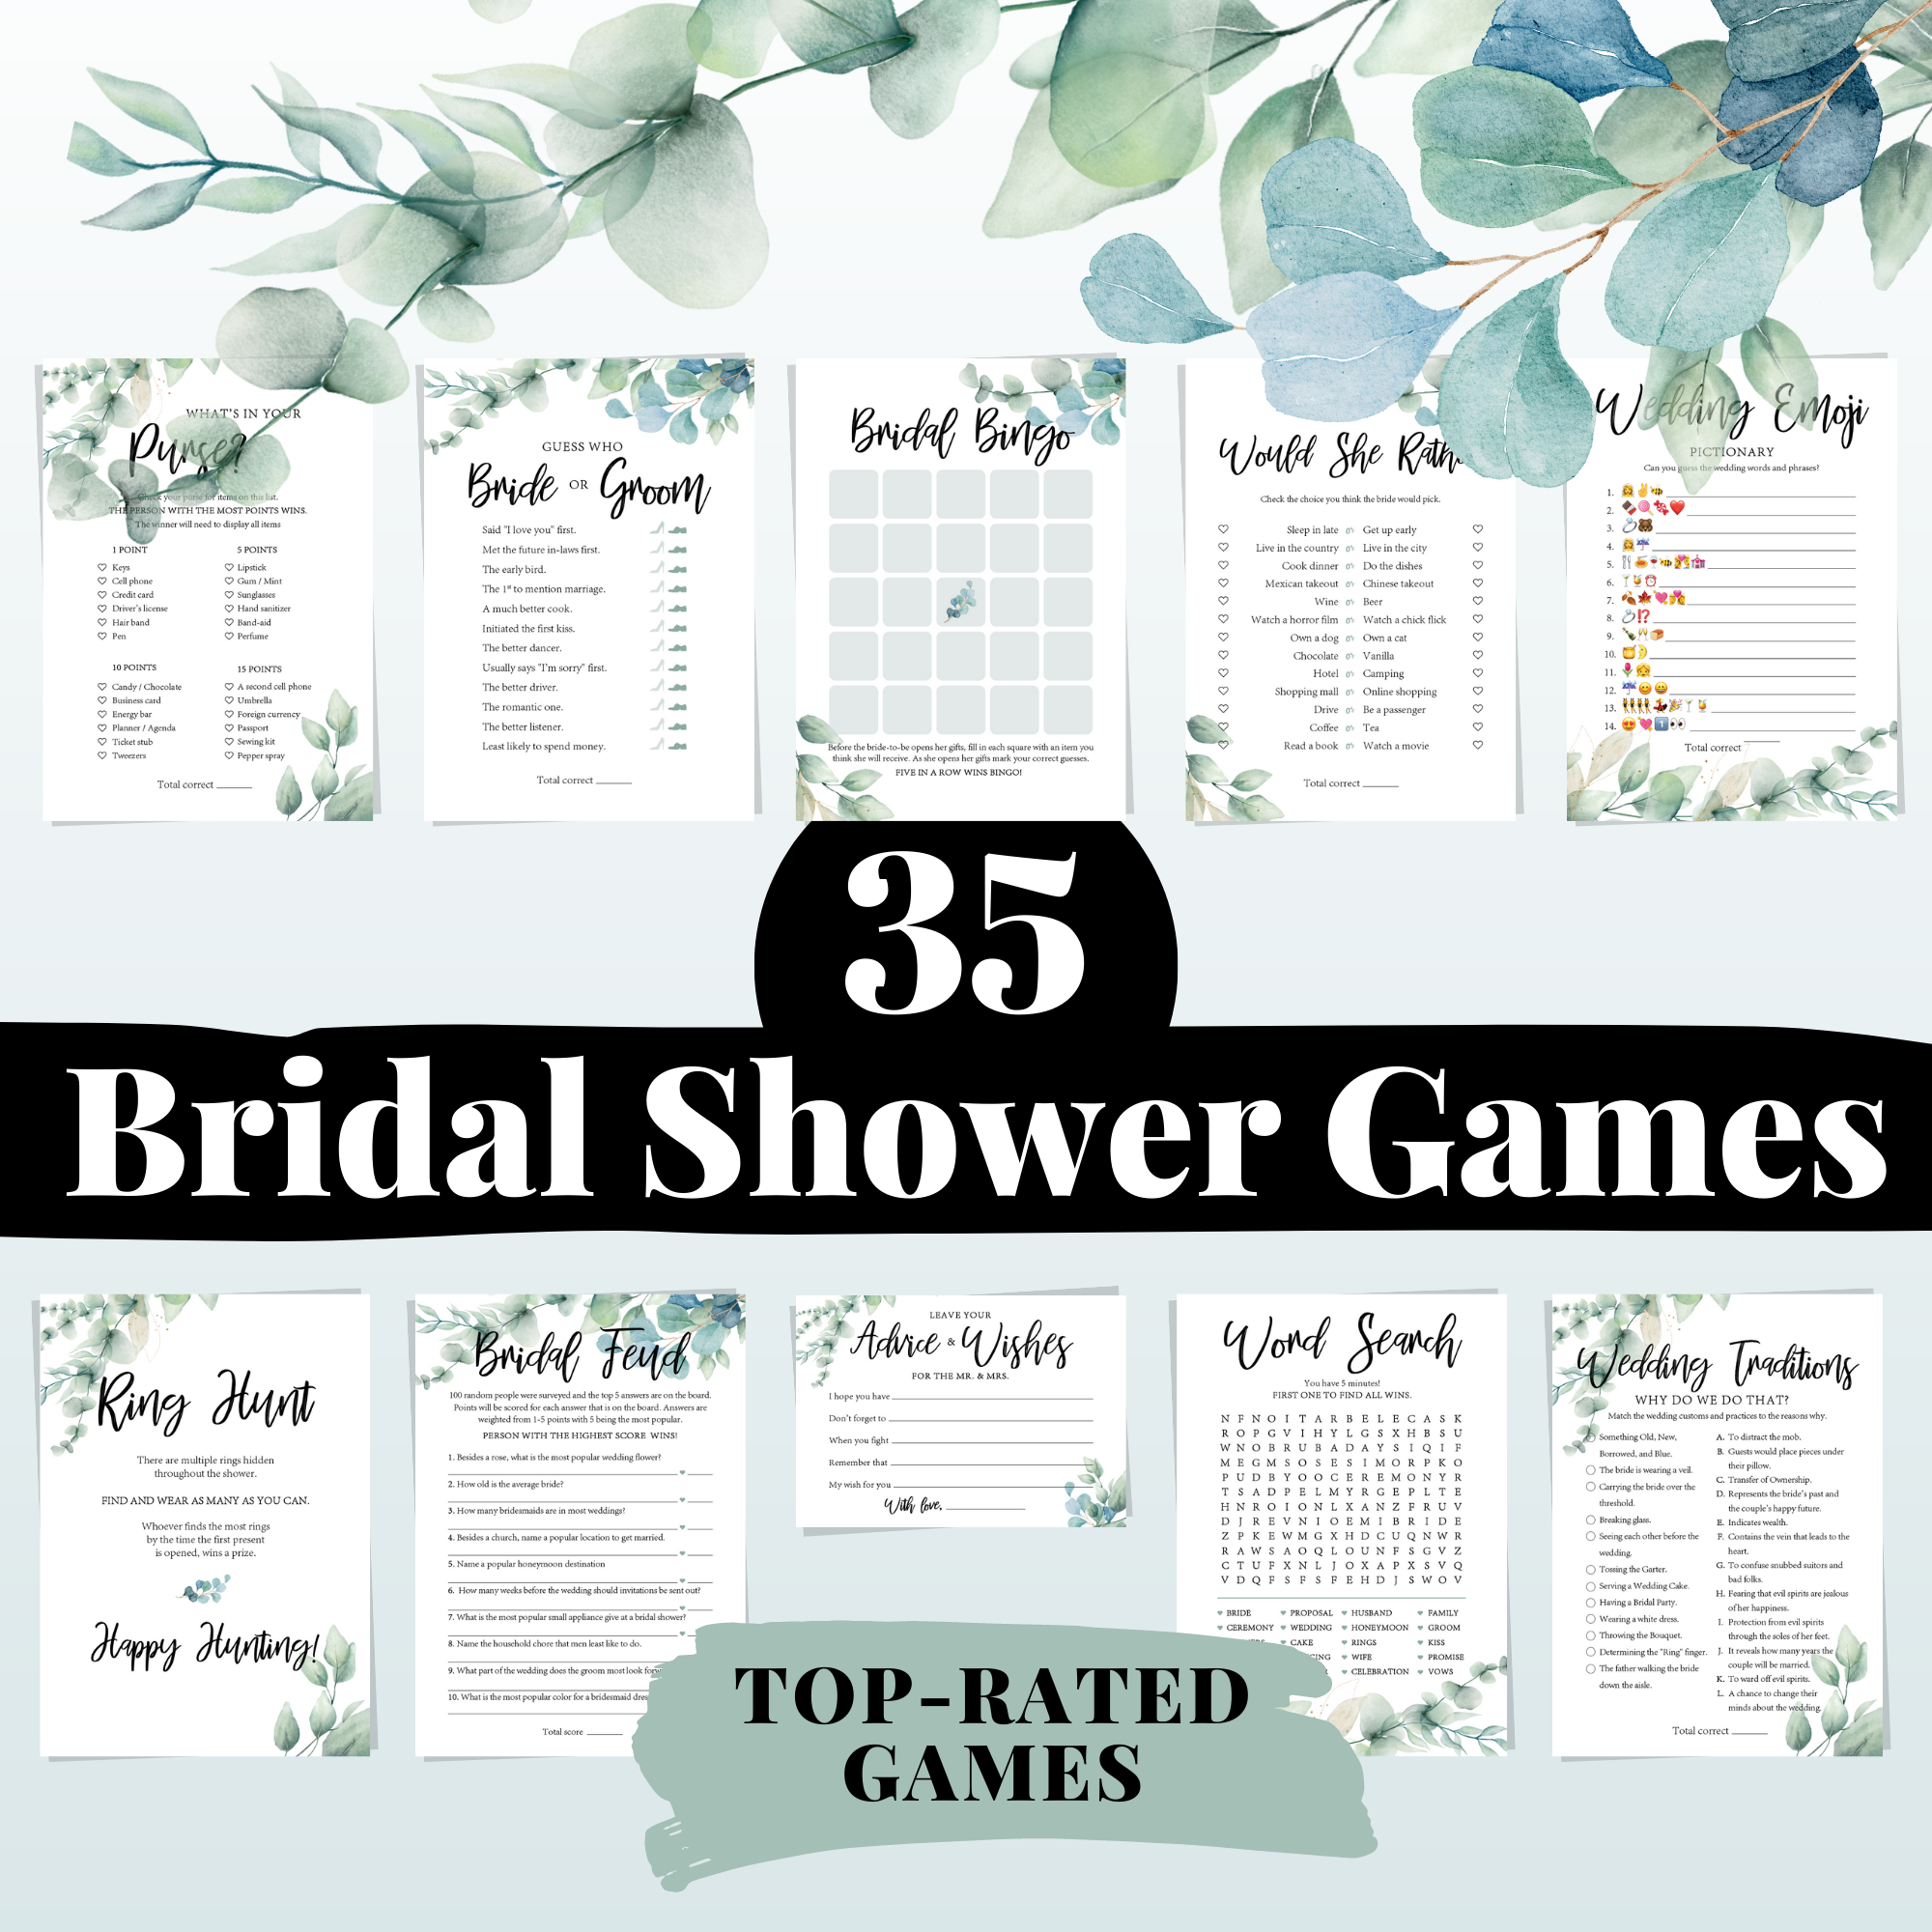 Inkdotpot 50-Pack Lingerie Shower Whats in Your Purse Bridal Shower Game  Wedding Shower Bachelorette Party Bulk Activity Game Cards : Amazon.com.au:  Toys & Games